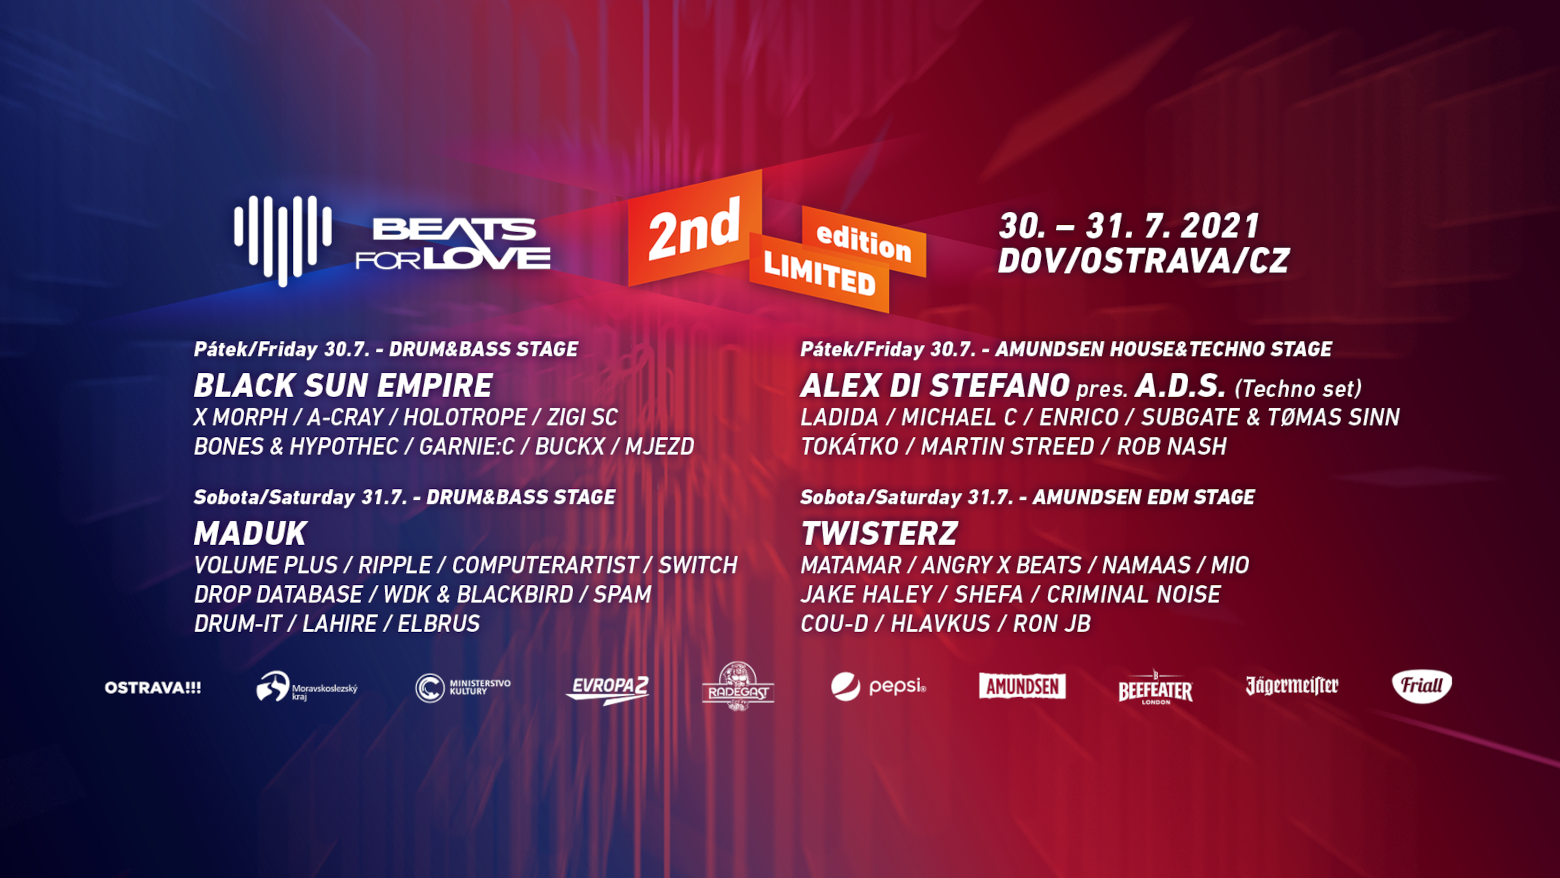 beats for love 2nd edition